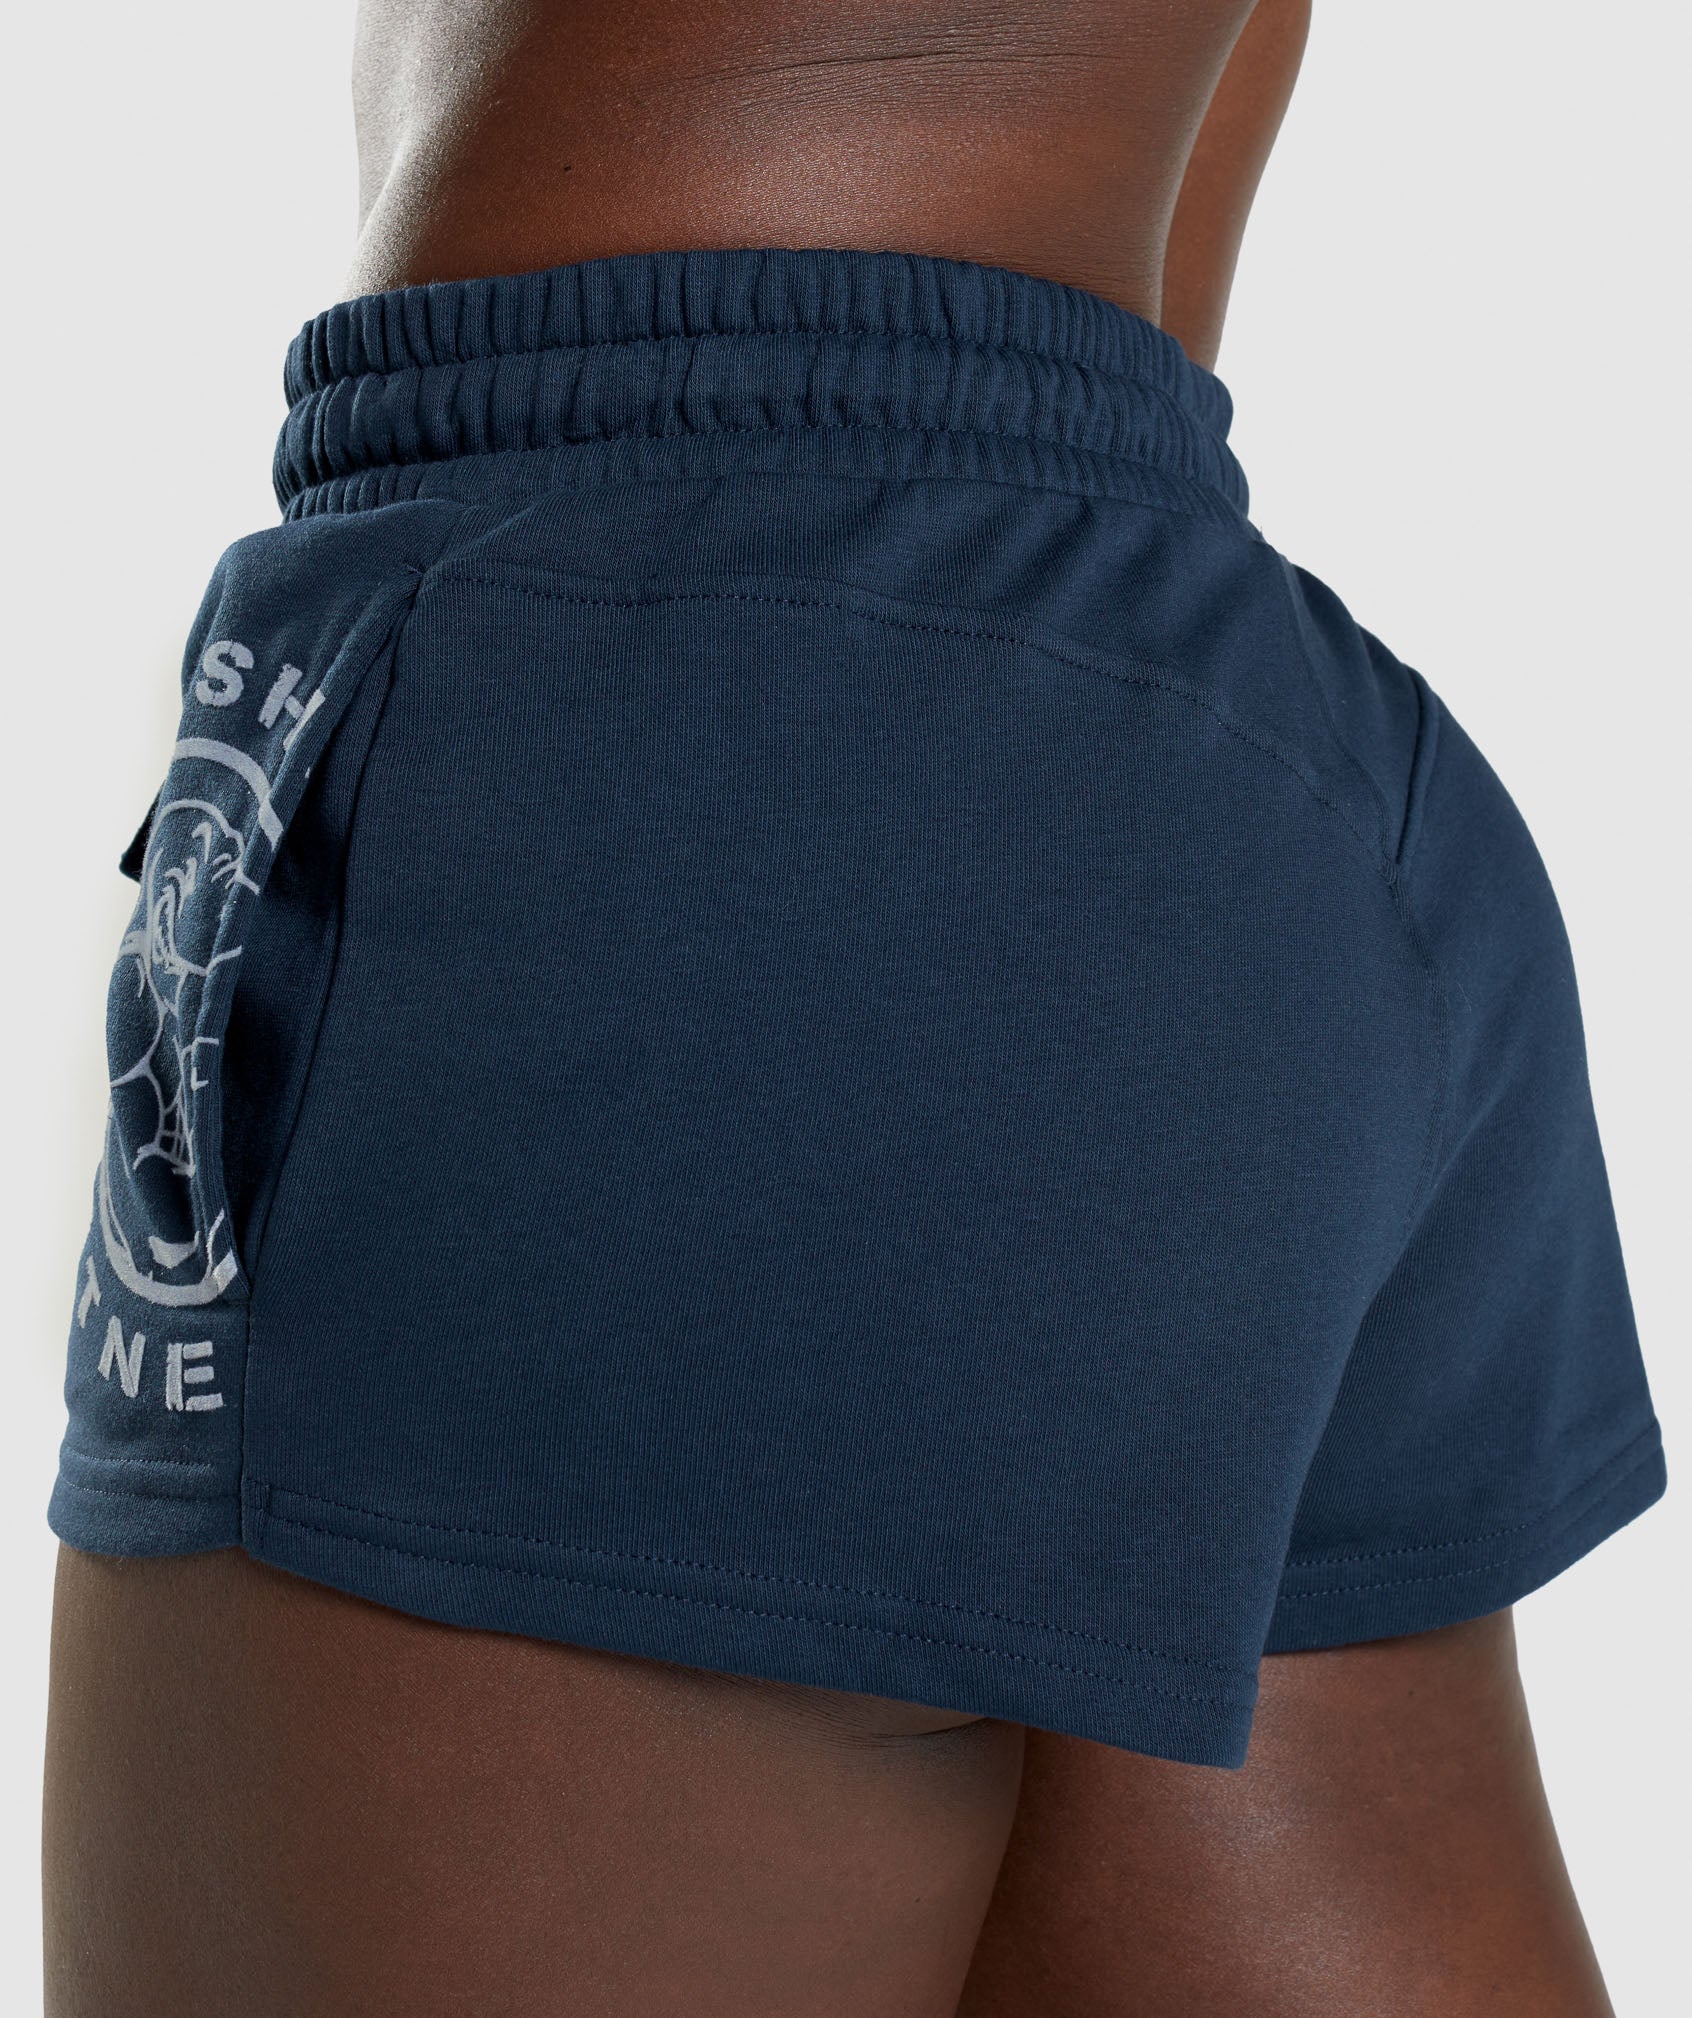 Legacy Graphic Shorts in Navy - view 5